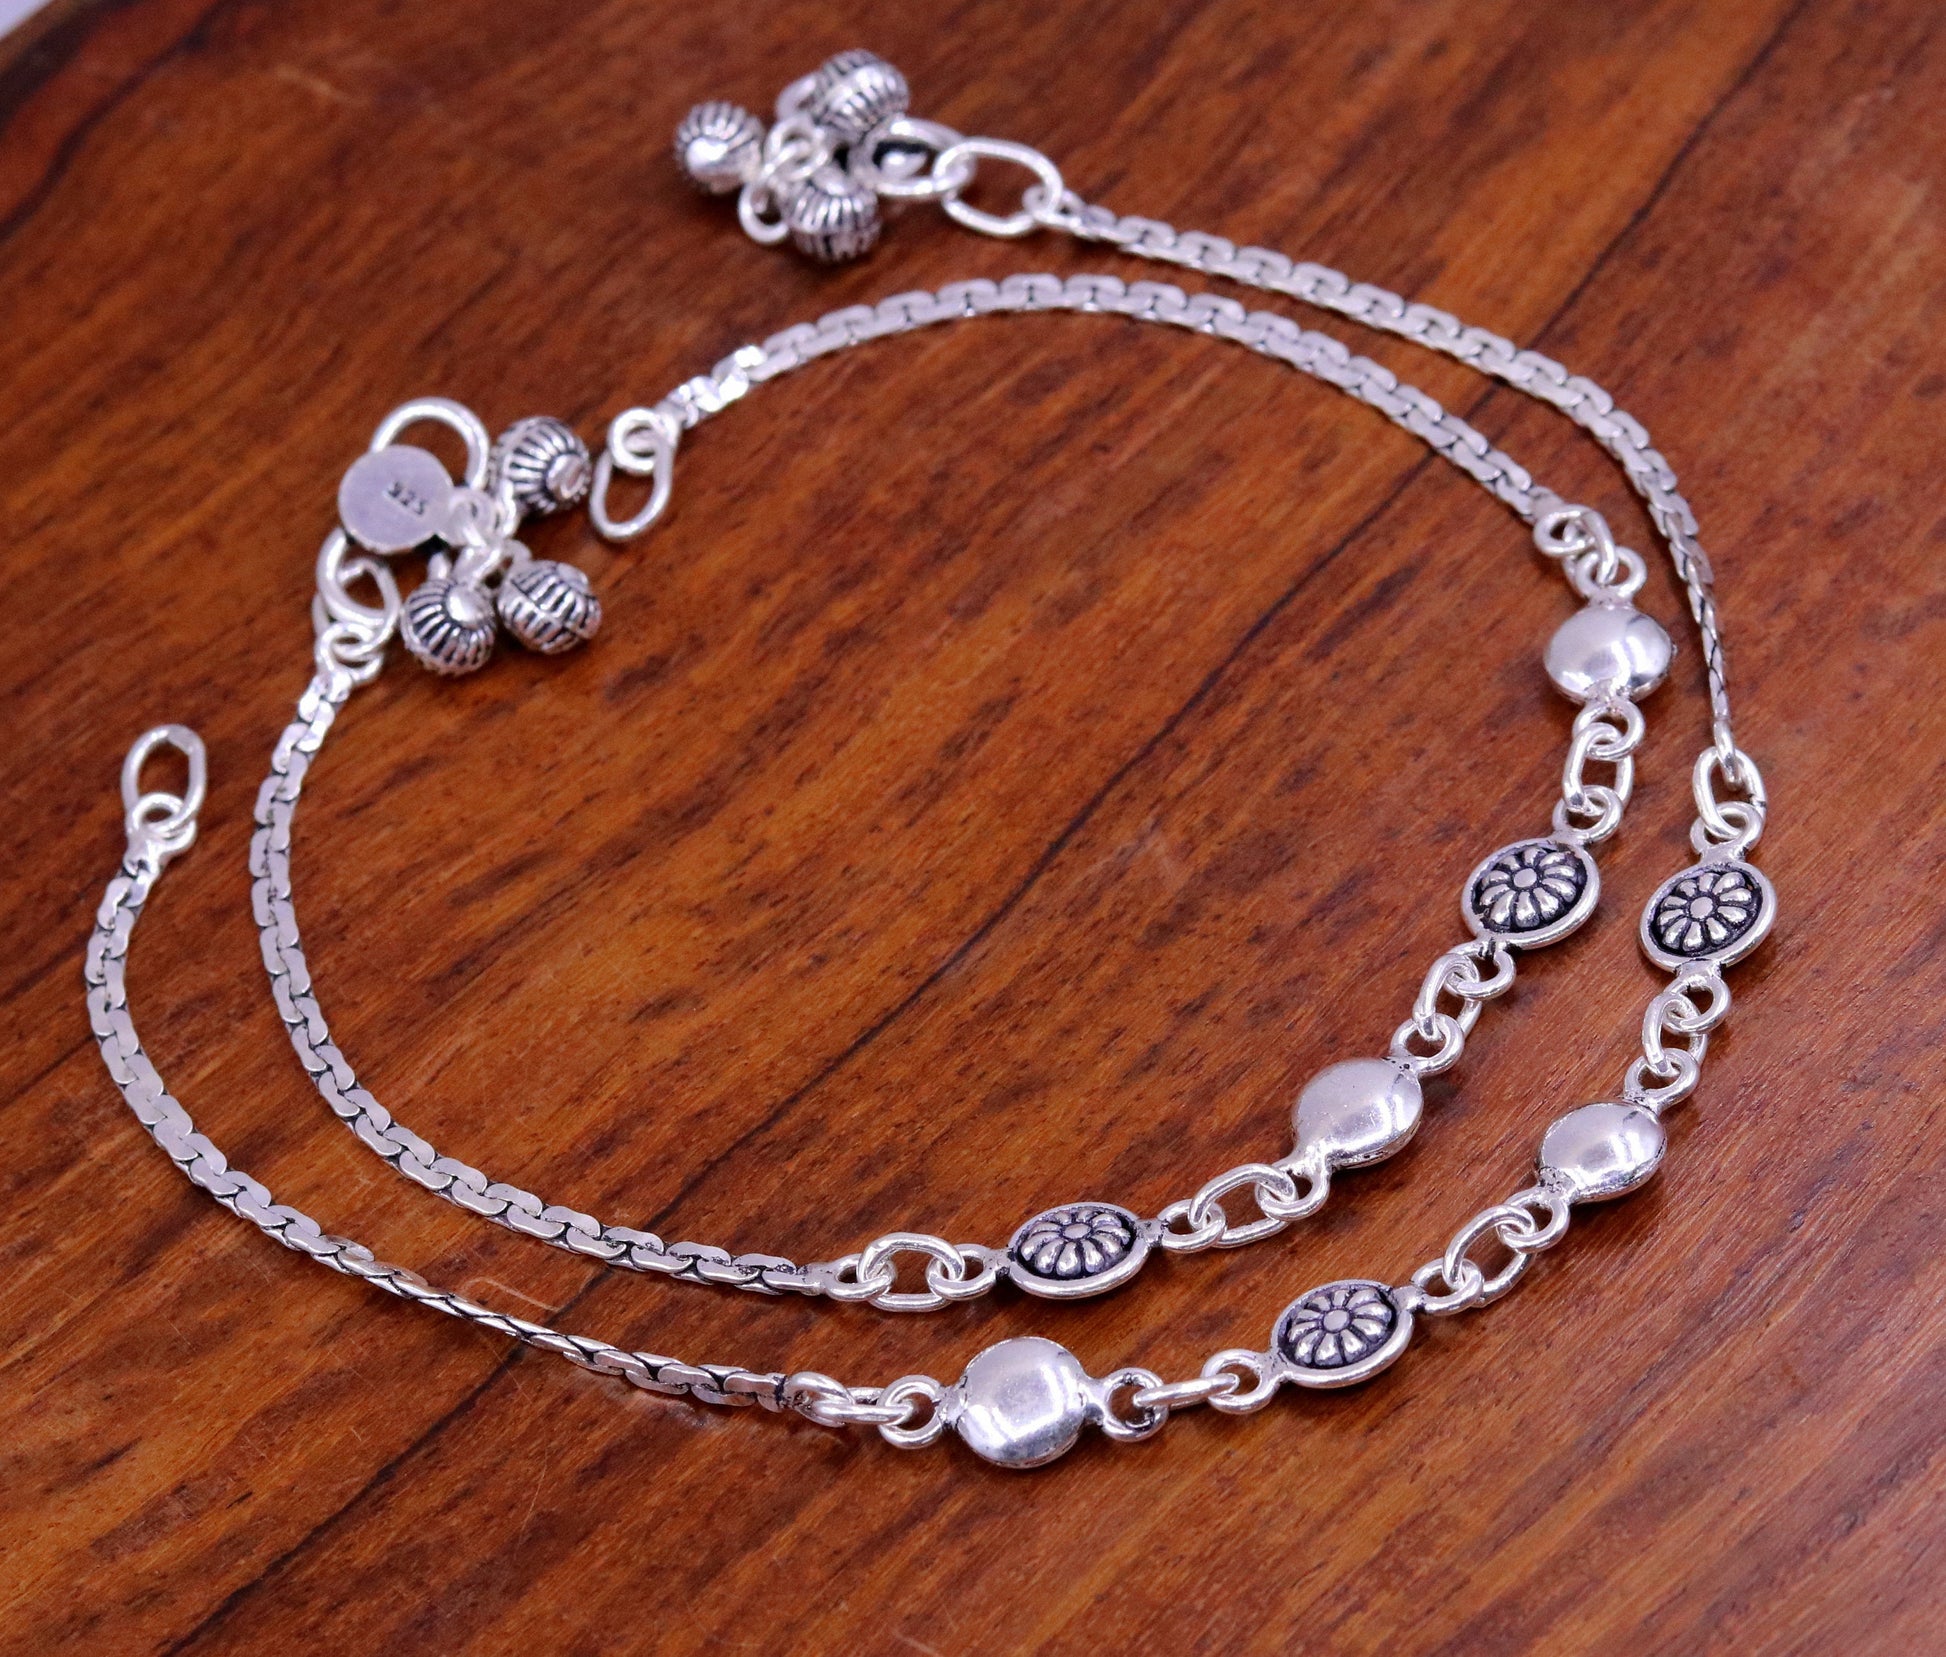 925 sterling silver handmade best gift for girl's bridesmaid gifting, excellent charm bracelet anklets, feet bracelet ankle jewelry ank93 - TRIBAL ORNAMENTS